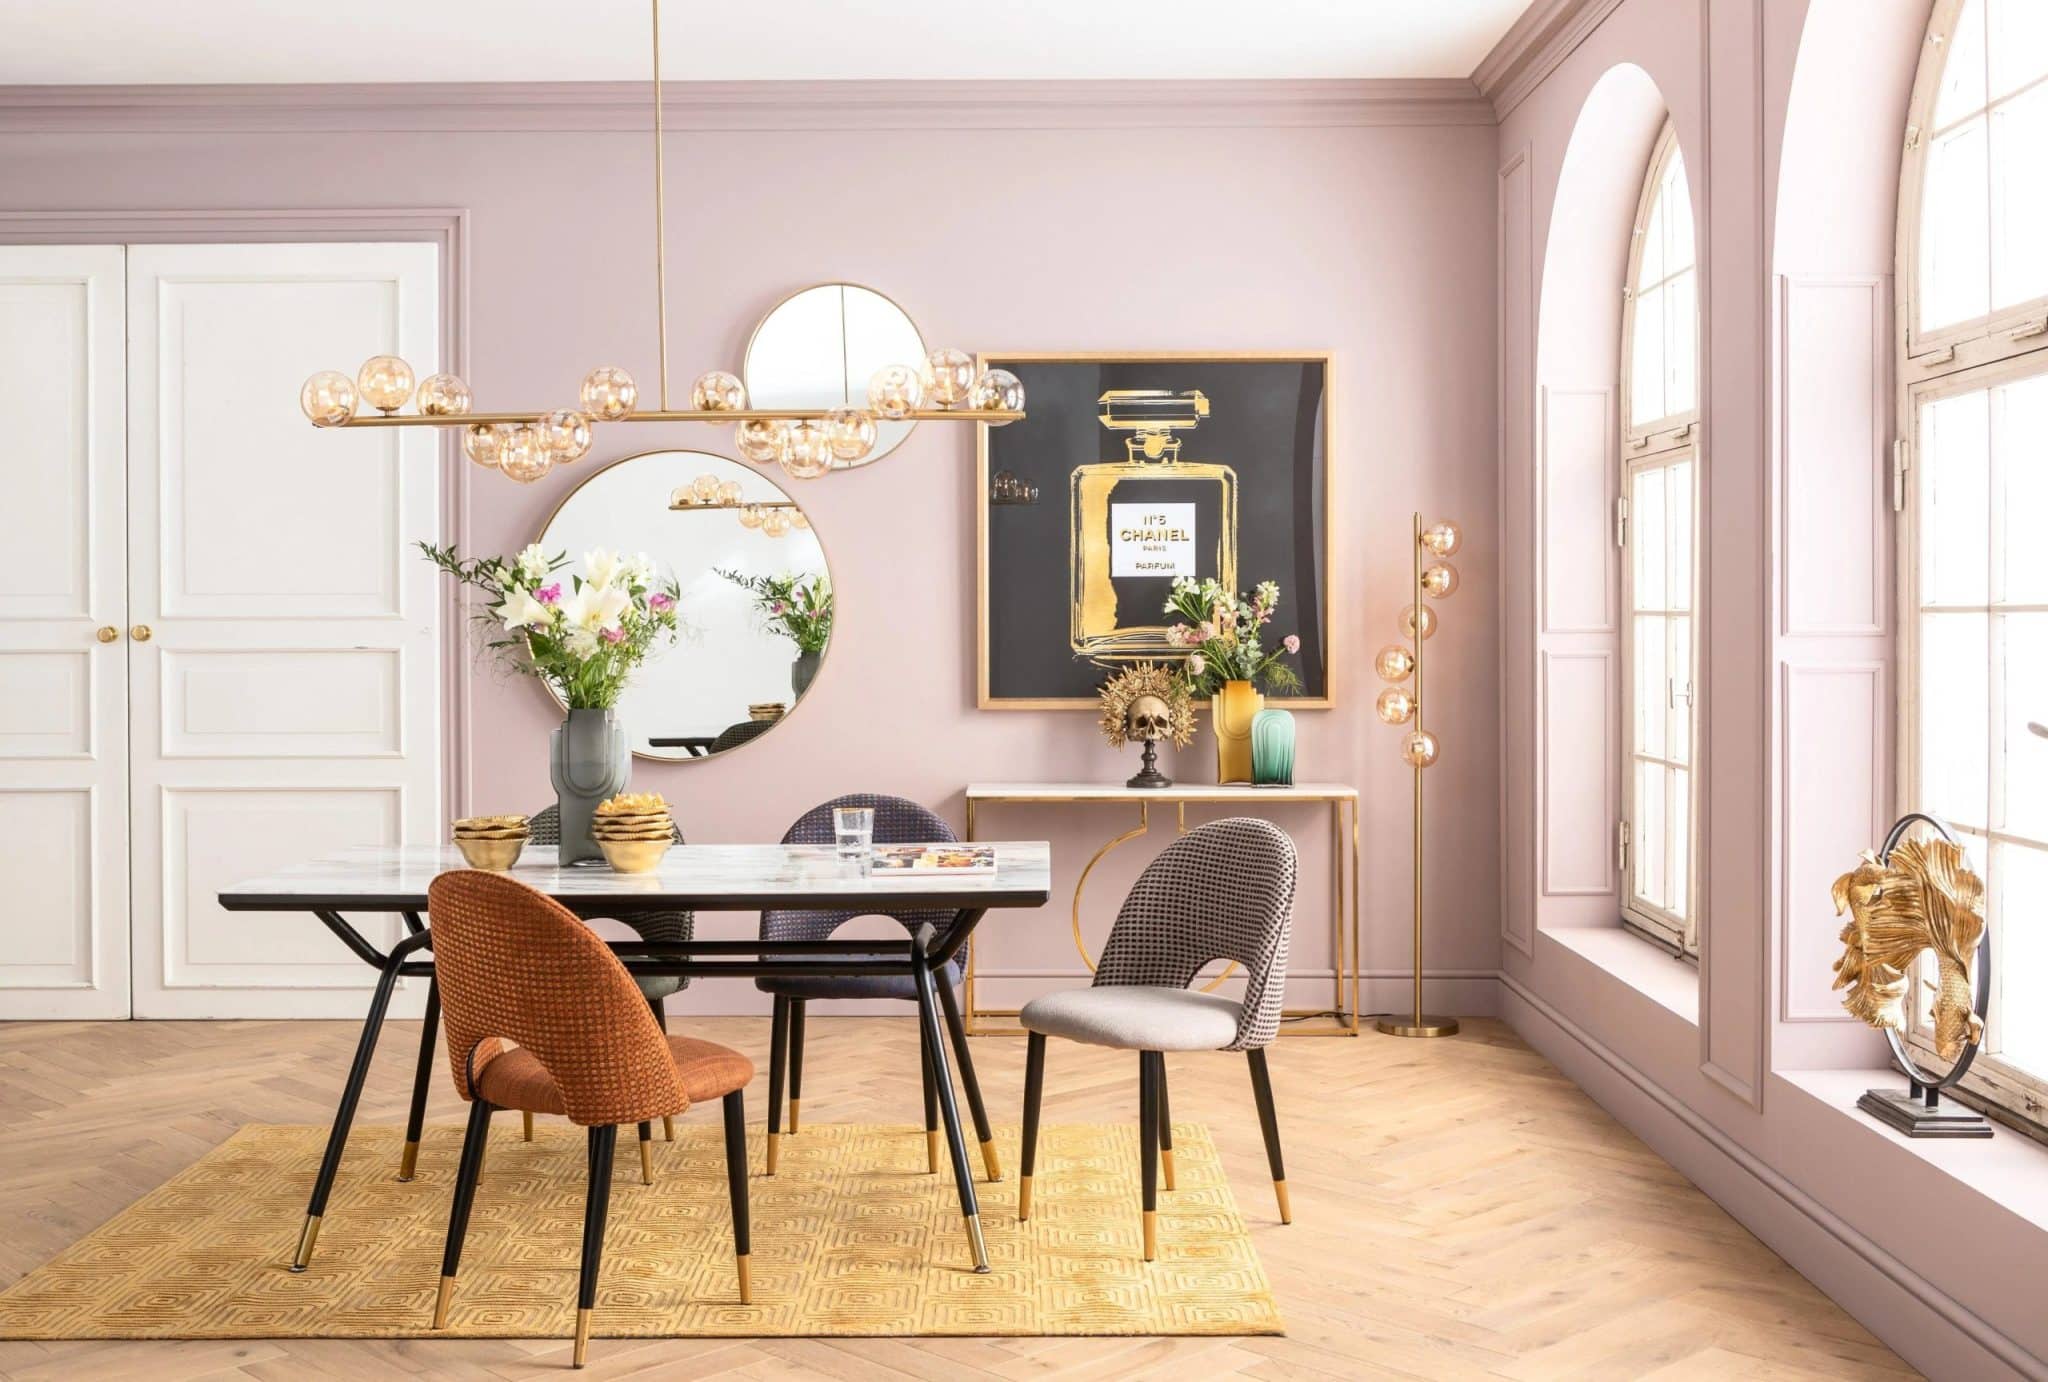 Use Mirrors to Expand Your Space mid century modern dining room